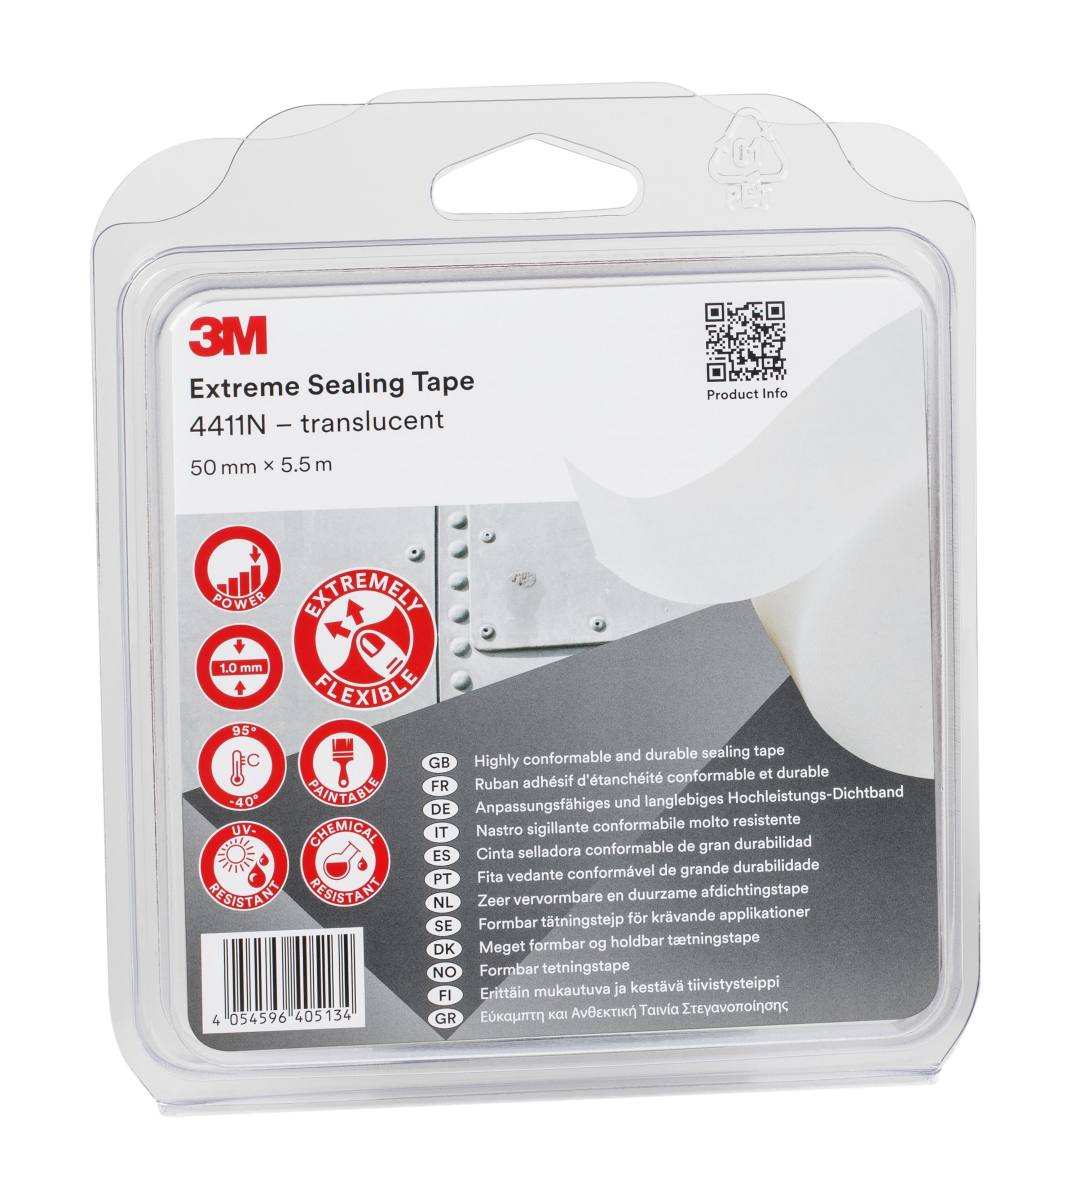 3M high-performance sealing tape 4411N, 50 mm x 5.5 m, 1 mm, translucent, blister pack